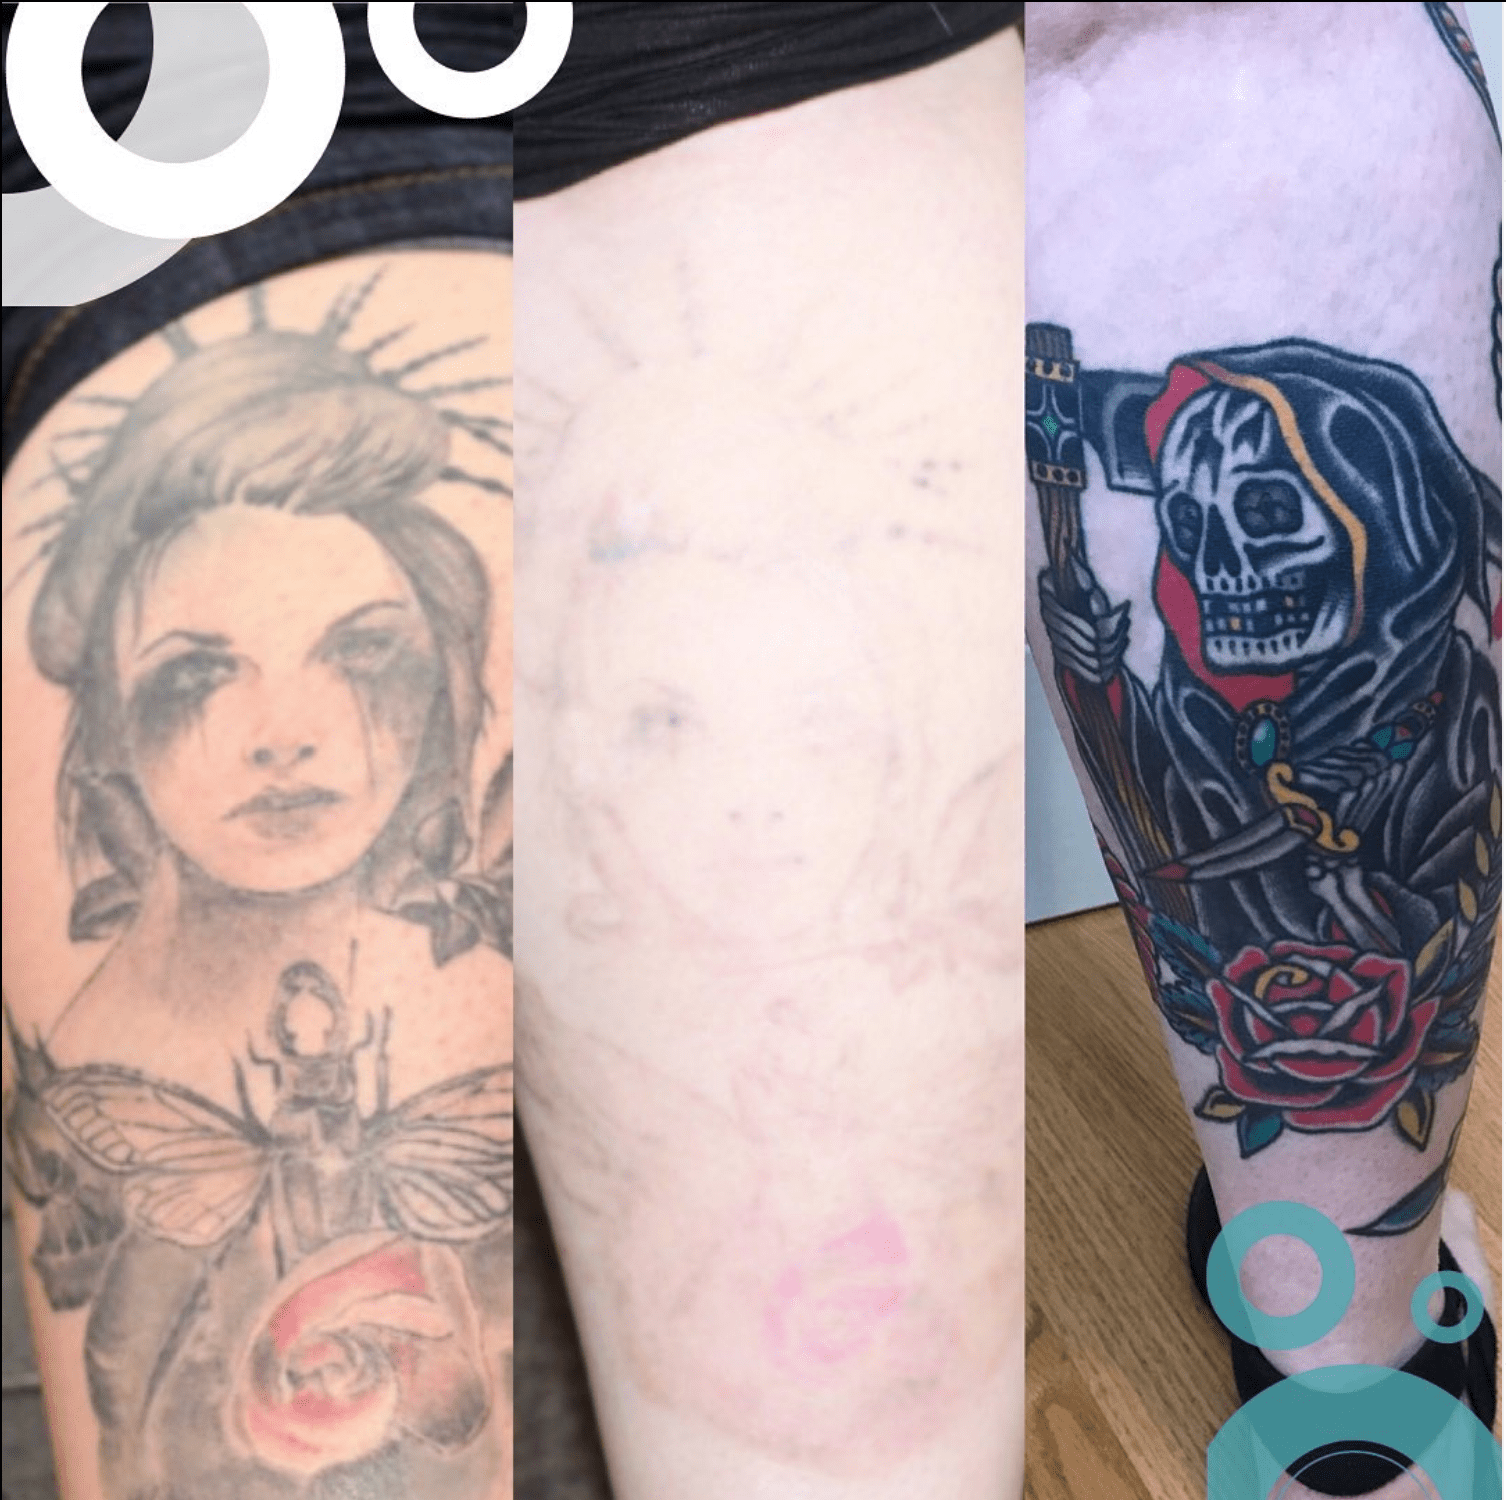 When Can You Tattoo Over Laser Tattoo Removal?